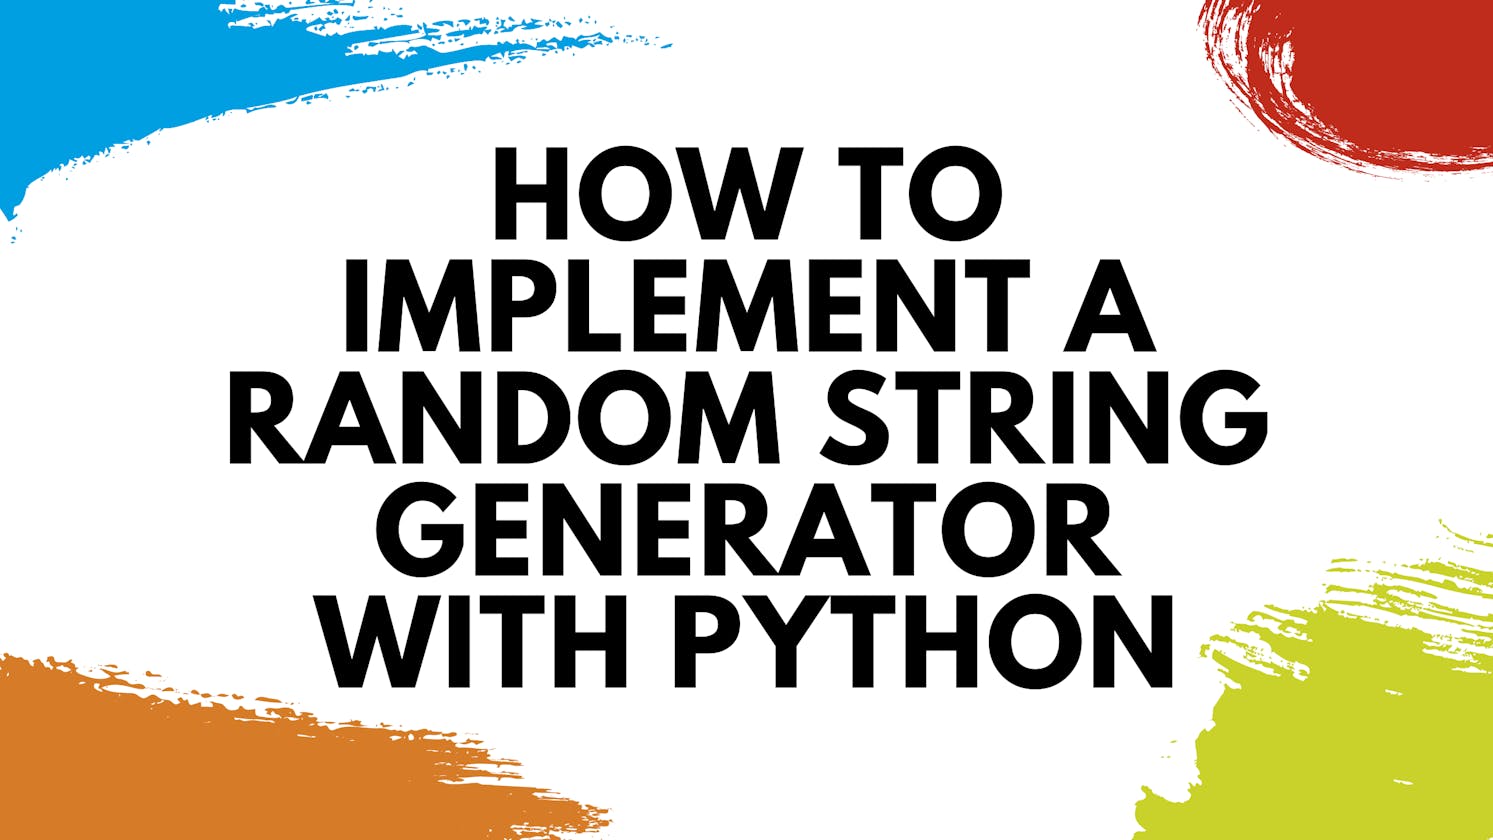 Cyberruimte Wiskunde maag How to Implement a Random String Generator With Python